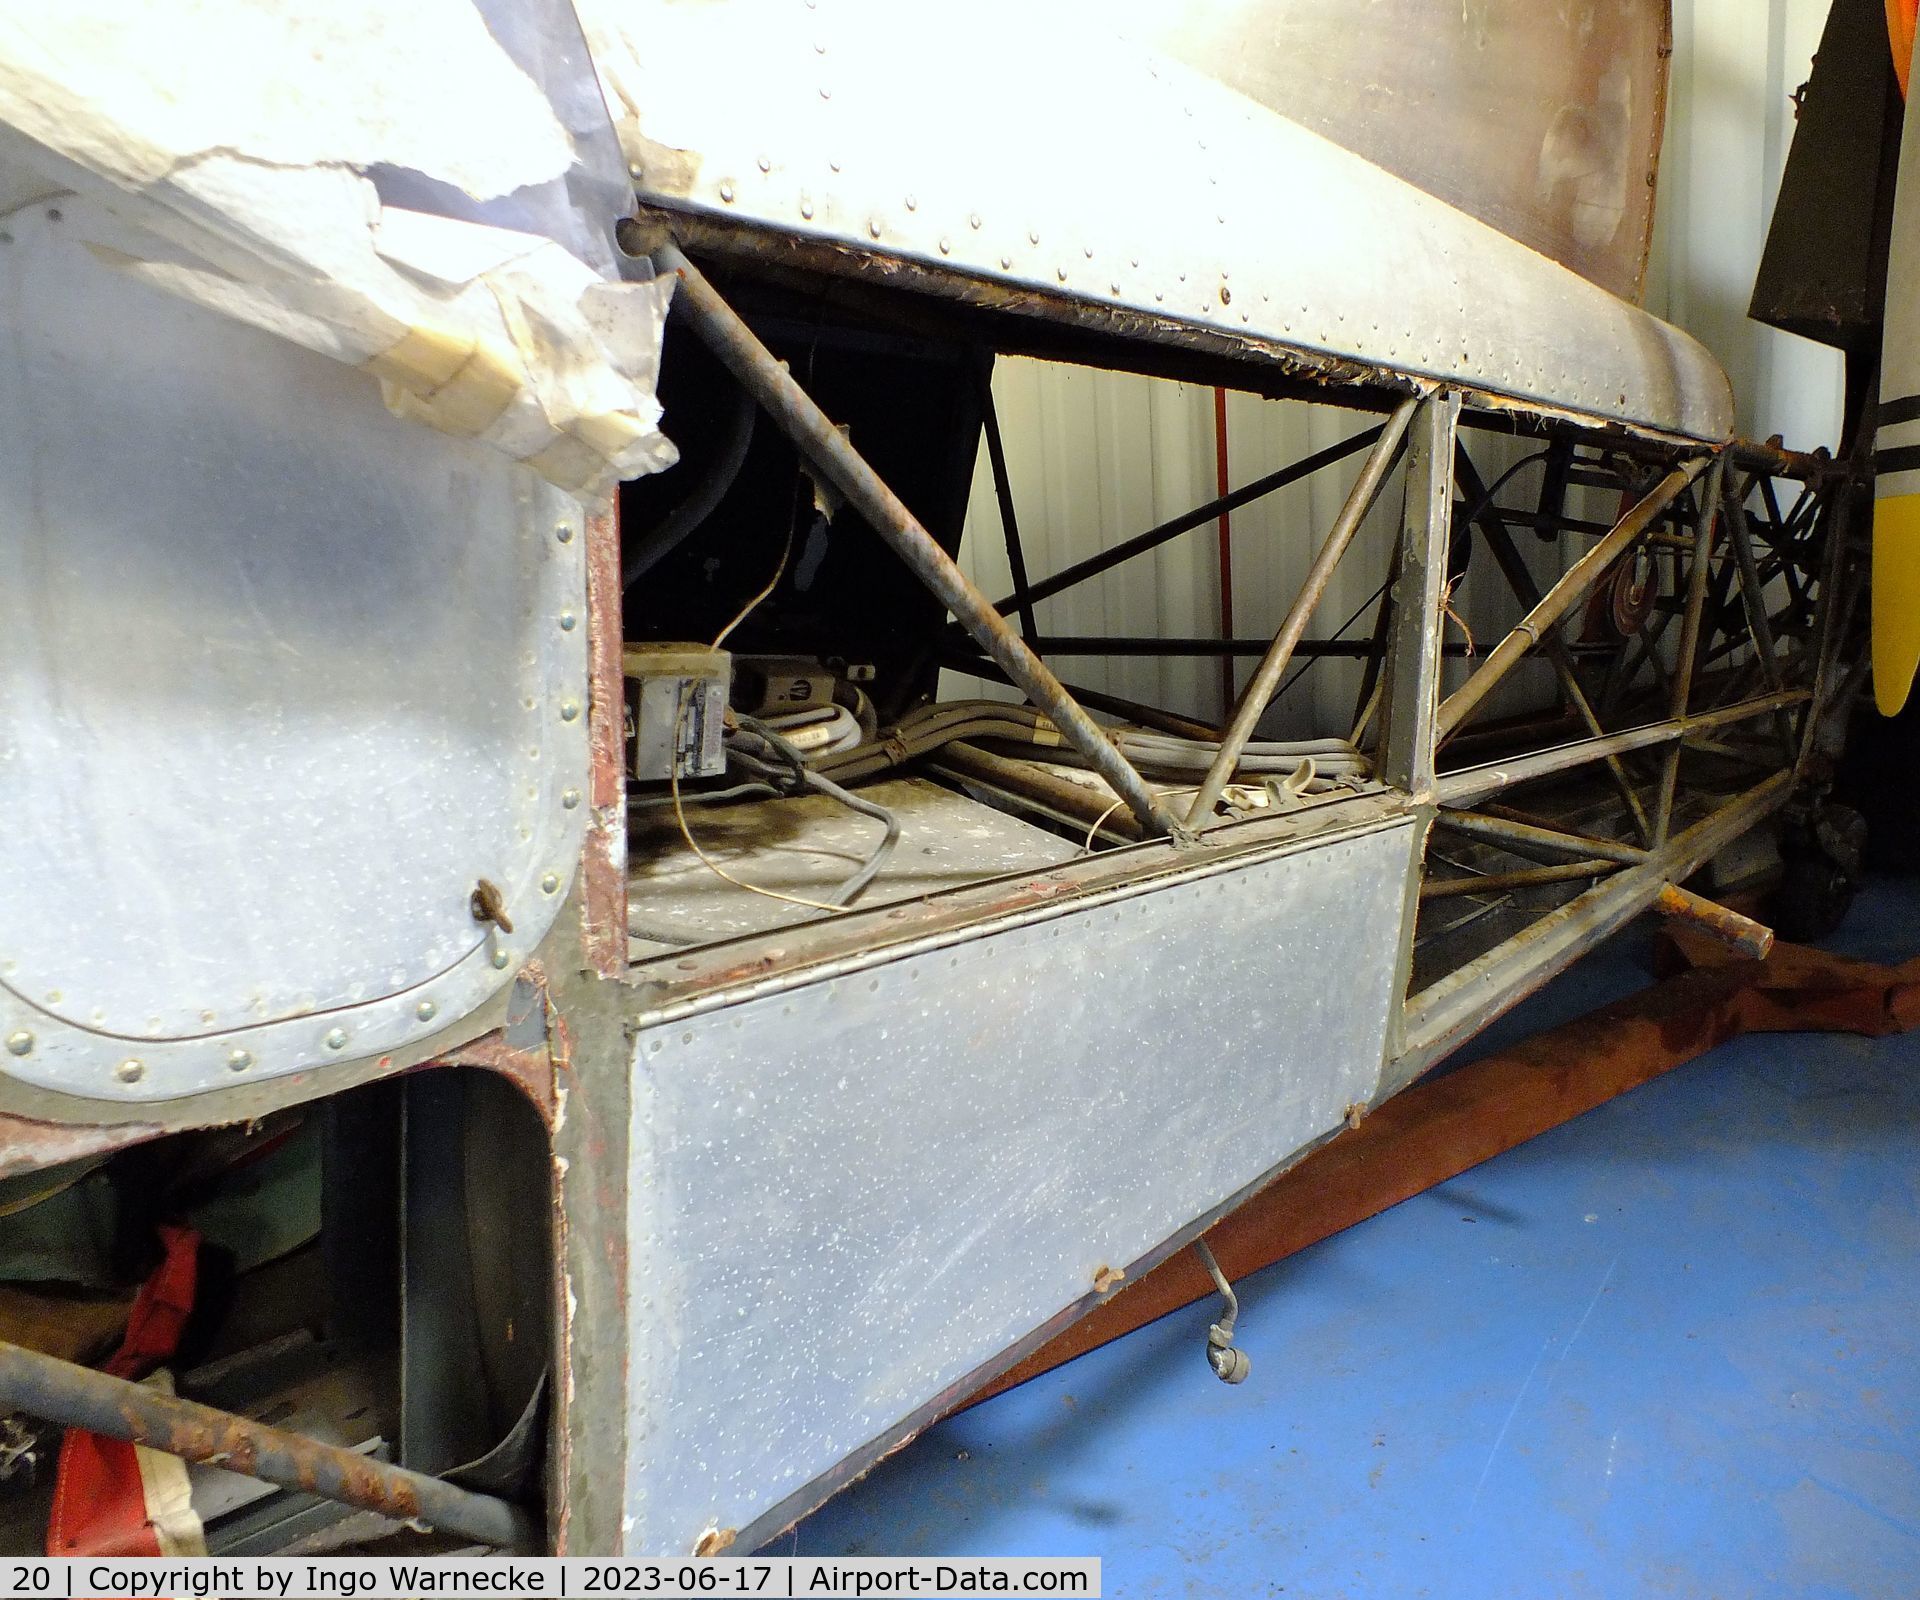 20, Nord 3400 Norbarbe C/N 20, Nord N.3400 Norbarbe (wings dismounted, awaiting restoration) at the Musee de l'Epopee de l'Industrie et de l'Aeronautique, Albert